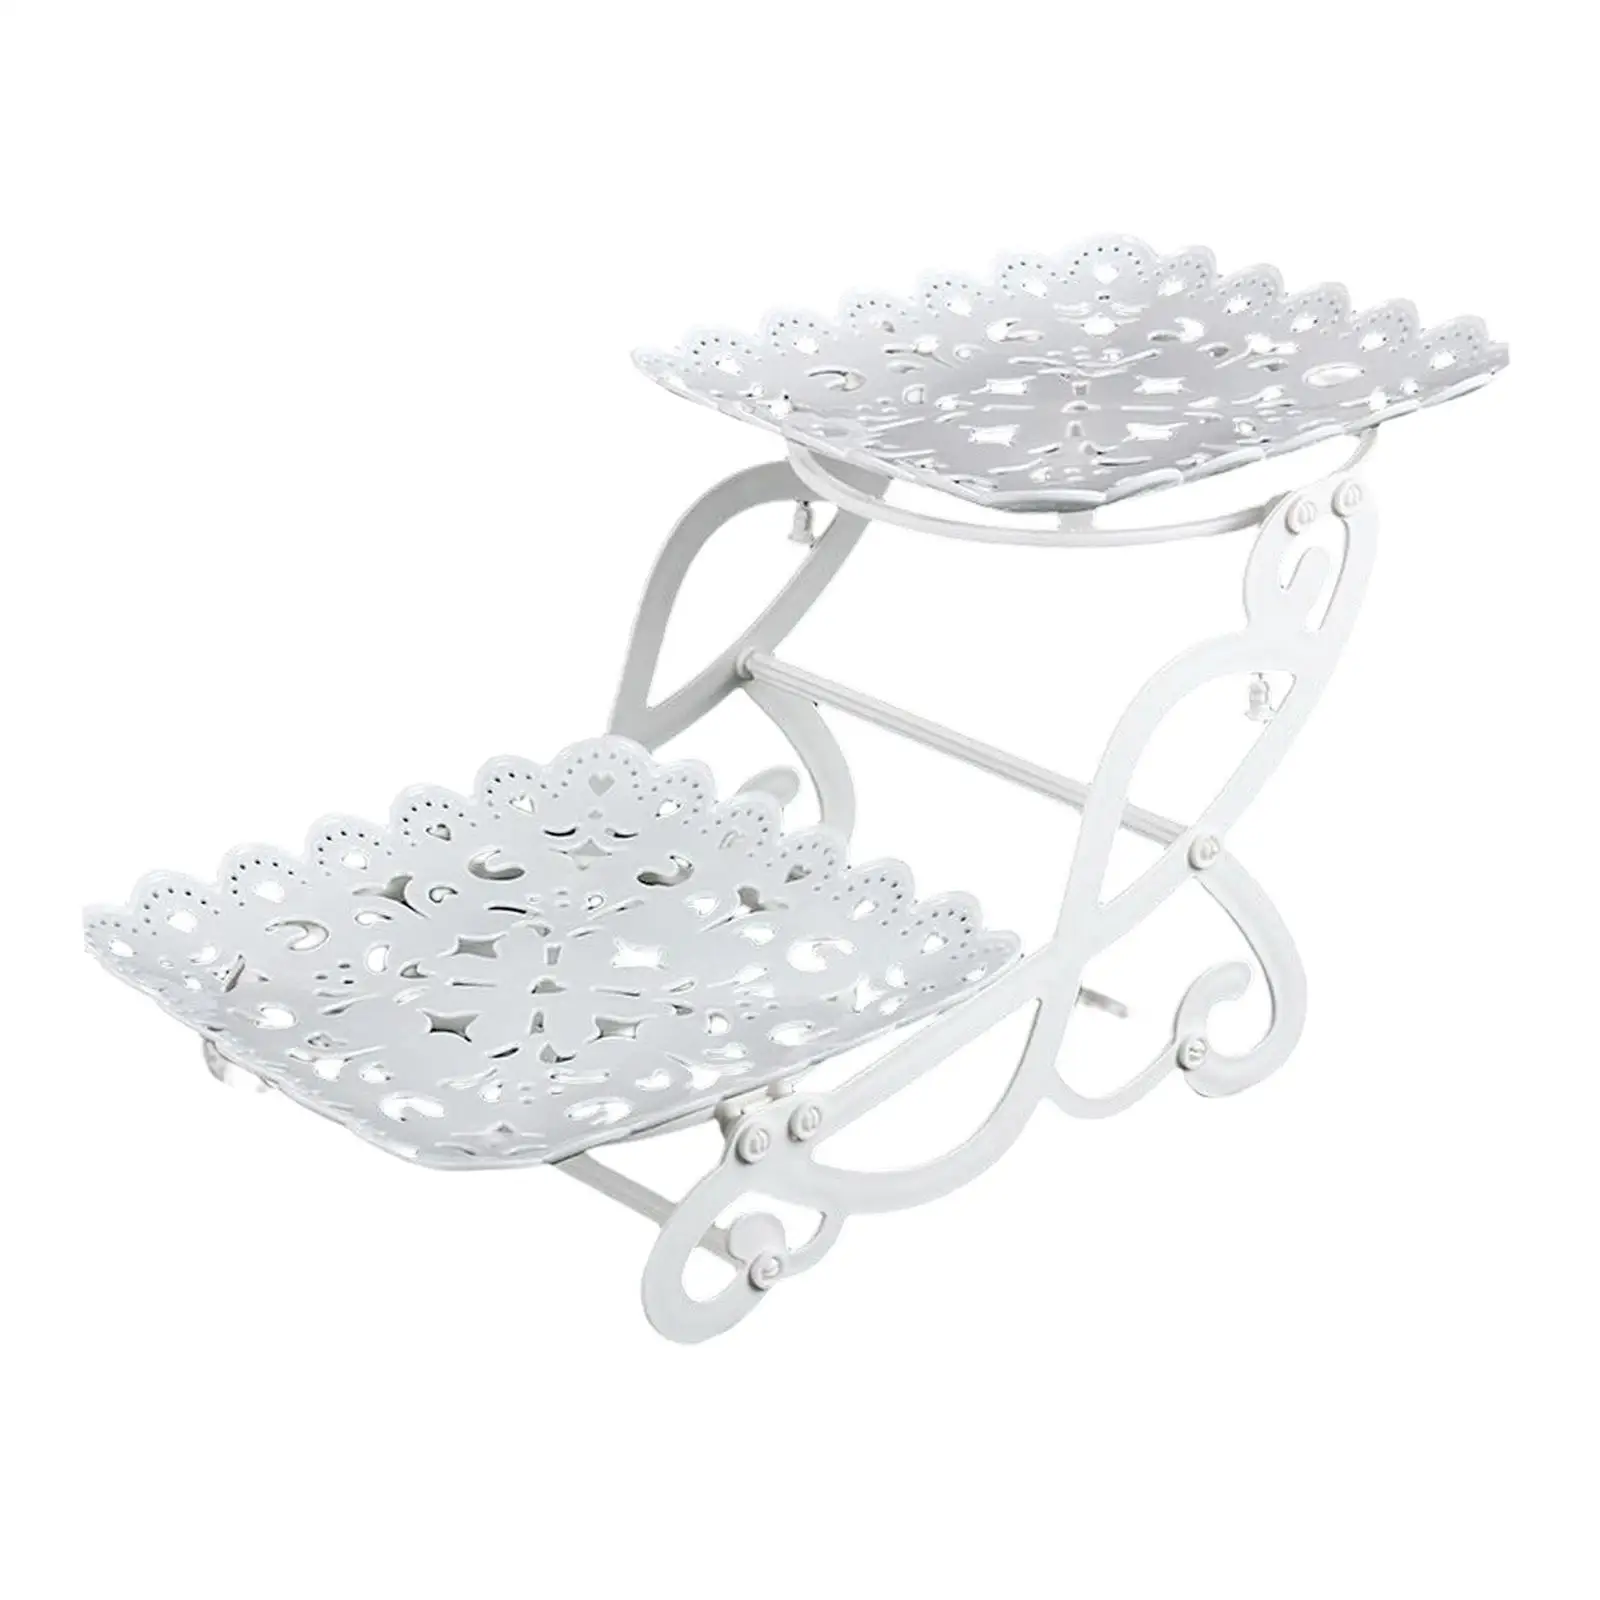 2 Tiers Cake Stand Snack Display Tray Dessert Tray for Dessert Afternoon Tea